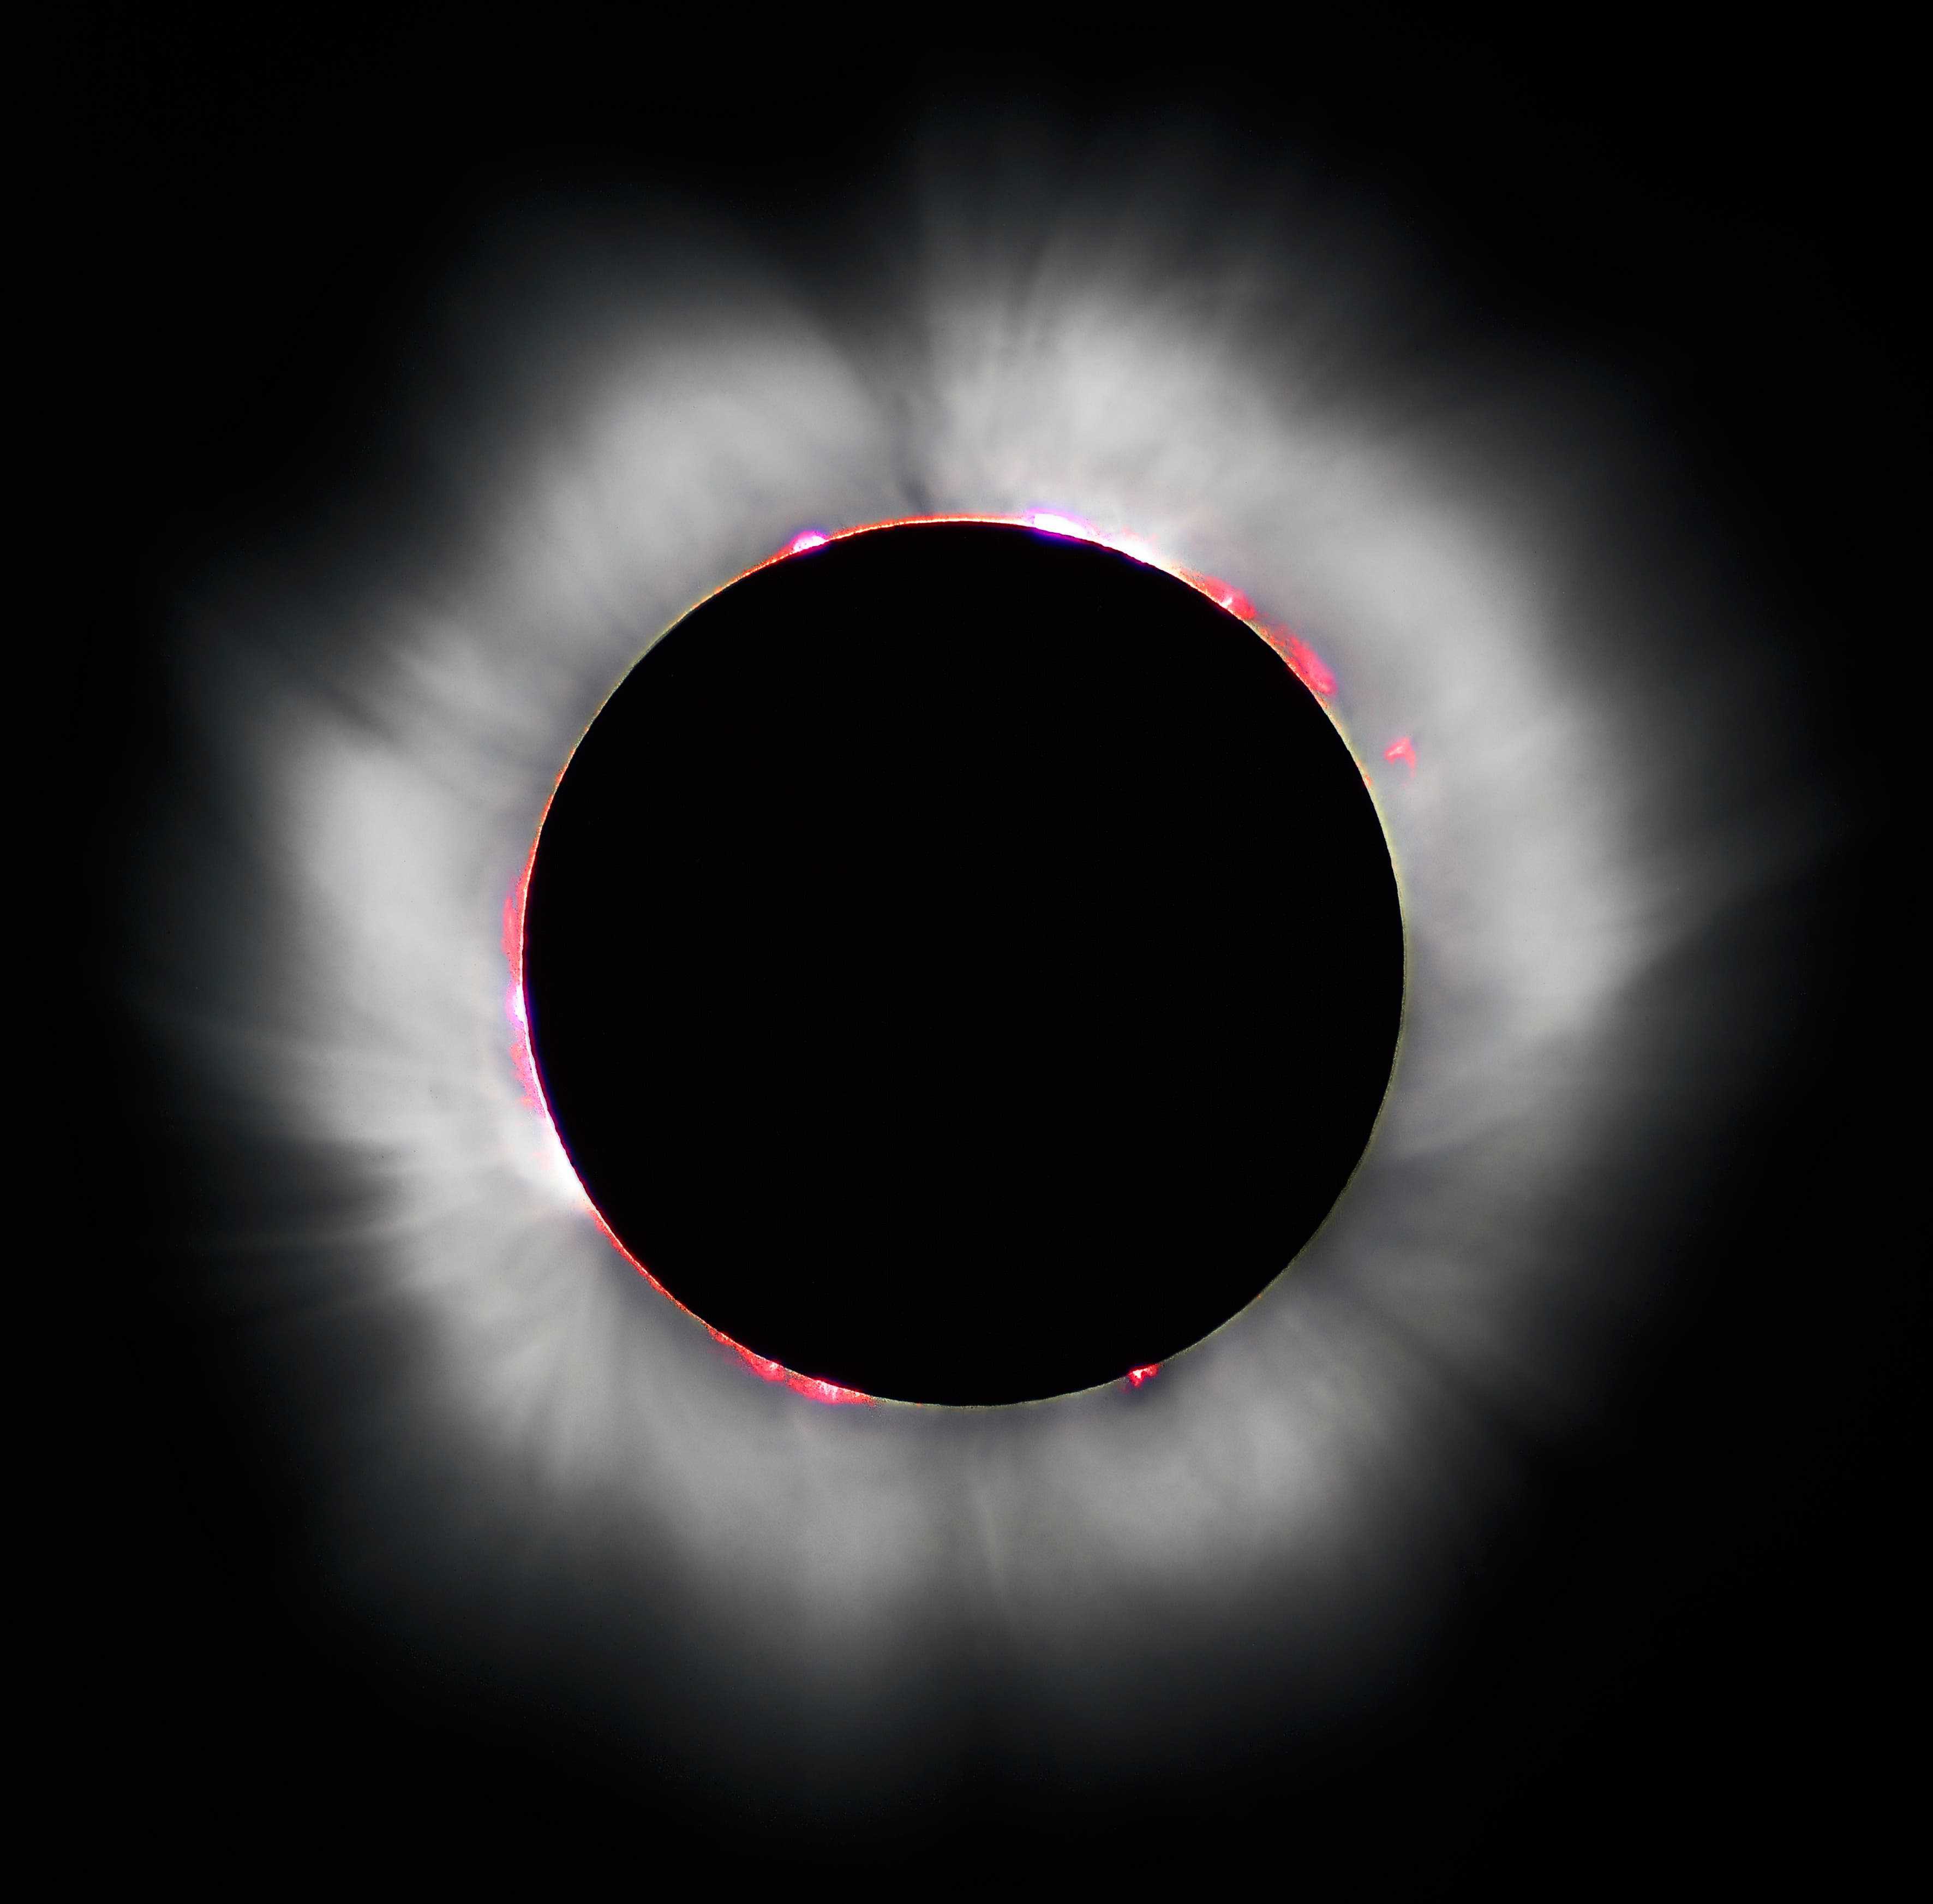 A total solar eclipse occurs when the Moon completely covers the Sun's disk, as seen in this 1999 solar eclipse. Image credits: Luc Viatour / Wikipedia.